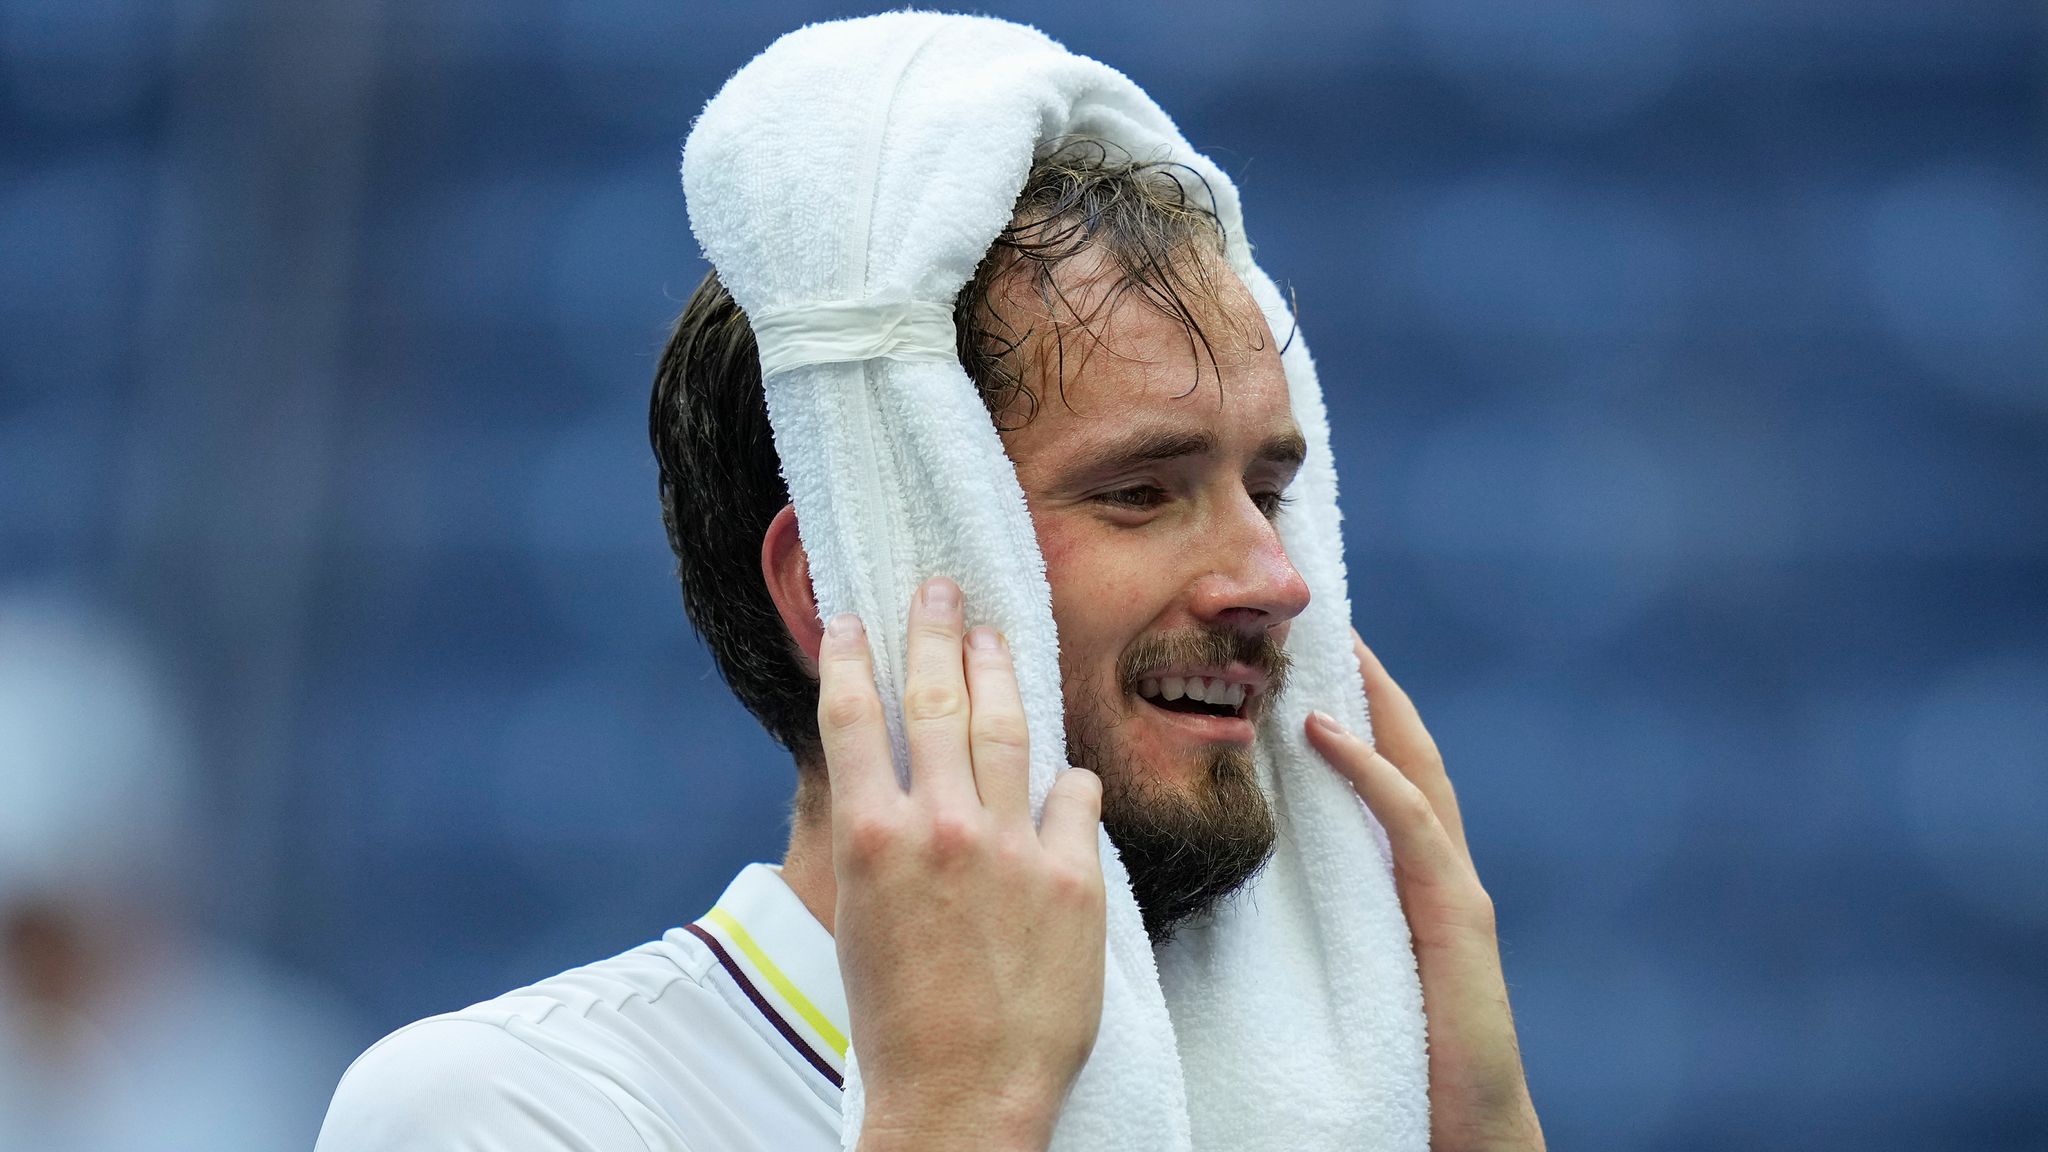 One player is going to die' – Daniil Medvedev's US Open fury in win over  Andrey Rublev